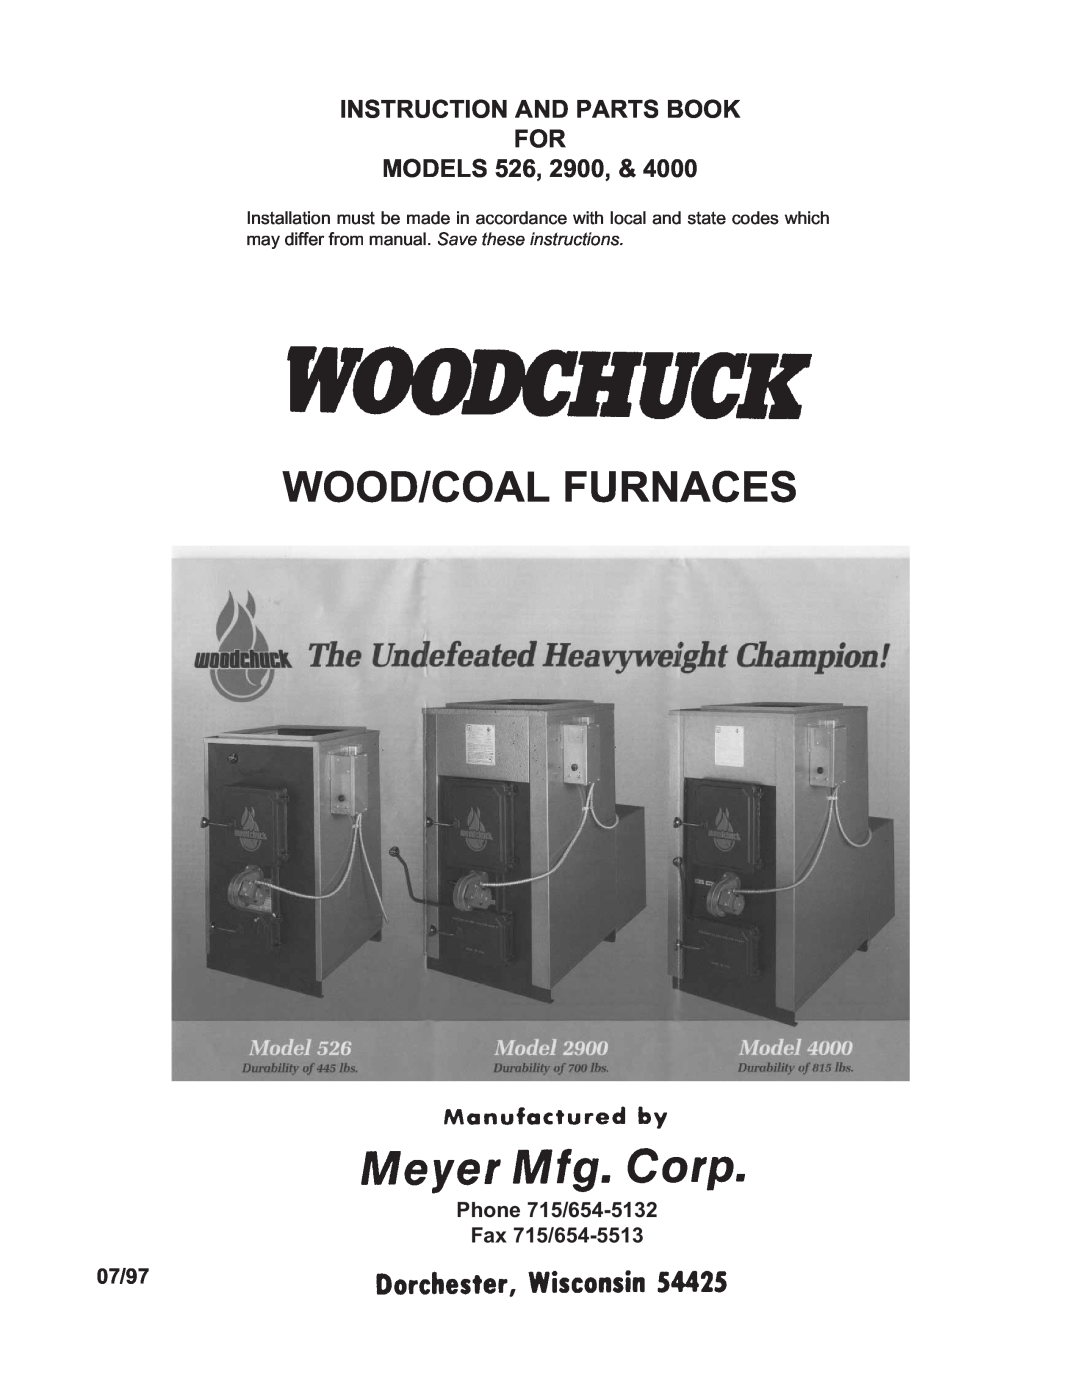 Meyer 2900 manual Instruction And Parts Book For, Models, Phone 715/654-5132 Fax 715/654-5513, 07/97, Wood/Coal Furnaces 